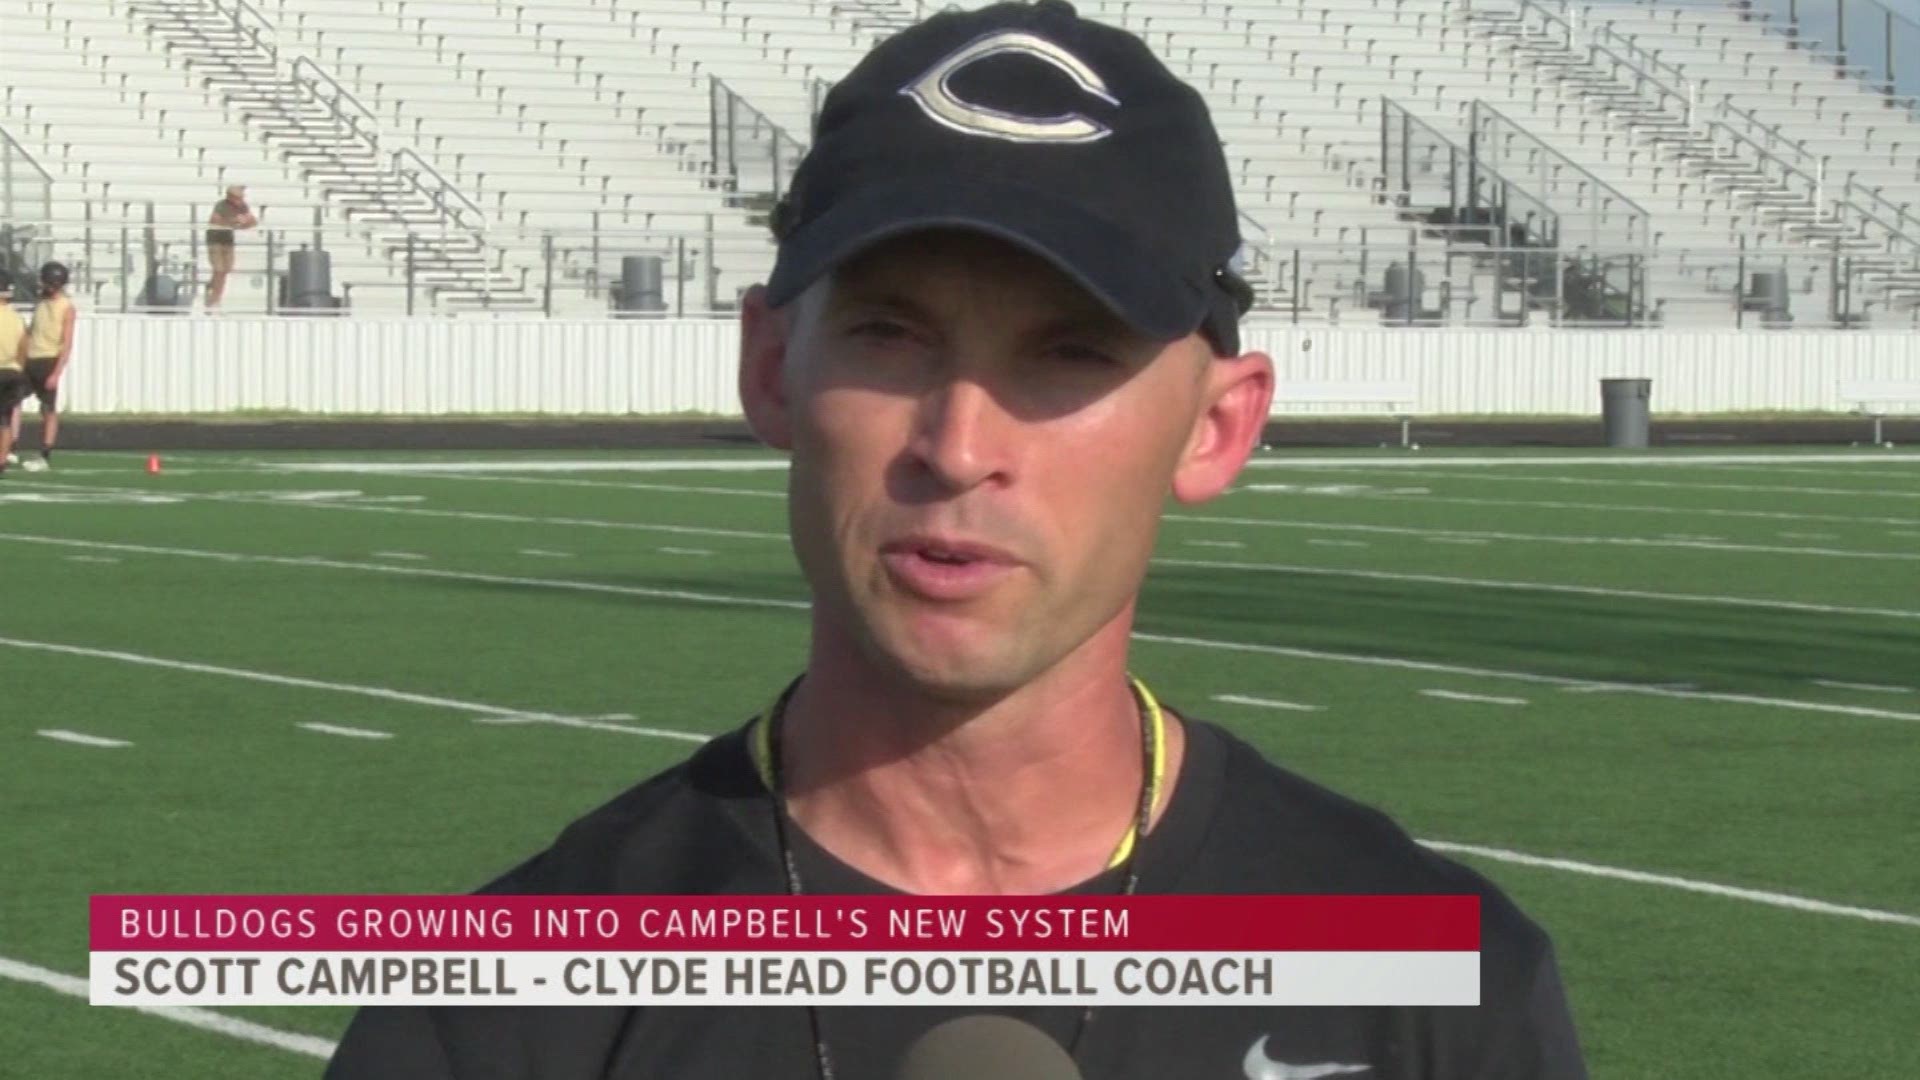 A few months into the new job and new Clyde head coach Scott Campbell has been hard at work installing his new system. His athletes seem to be taking to it well.